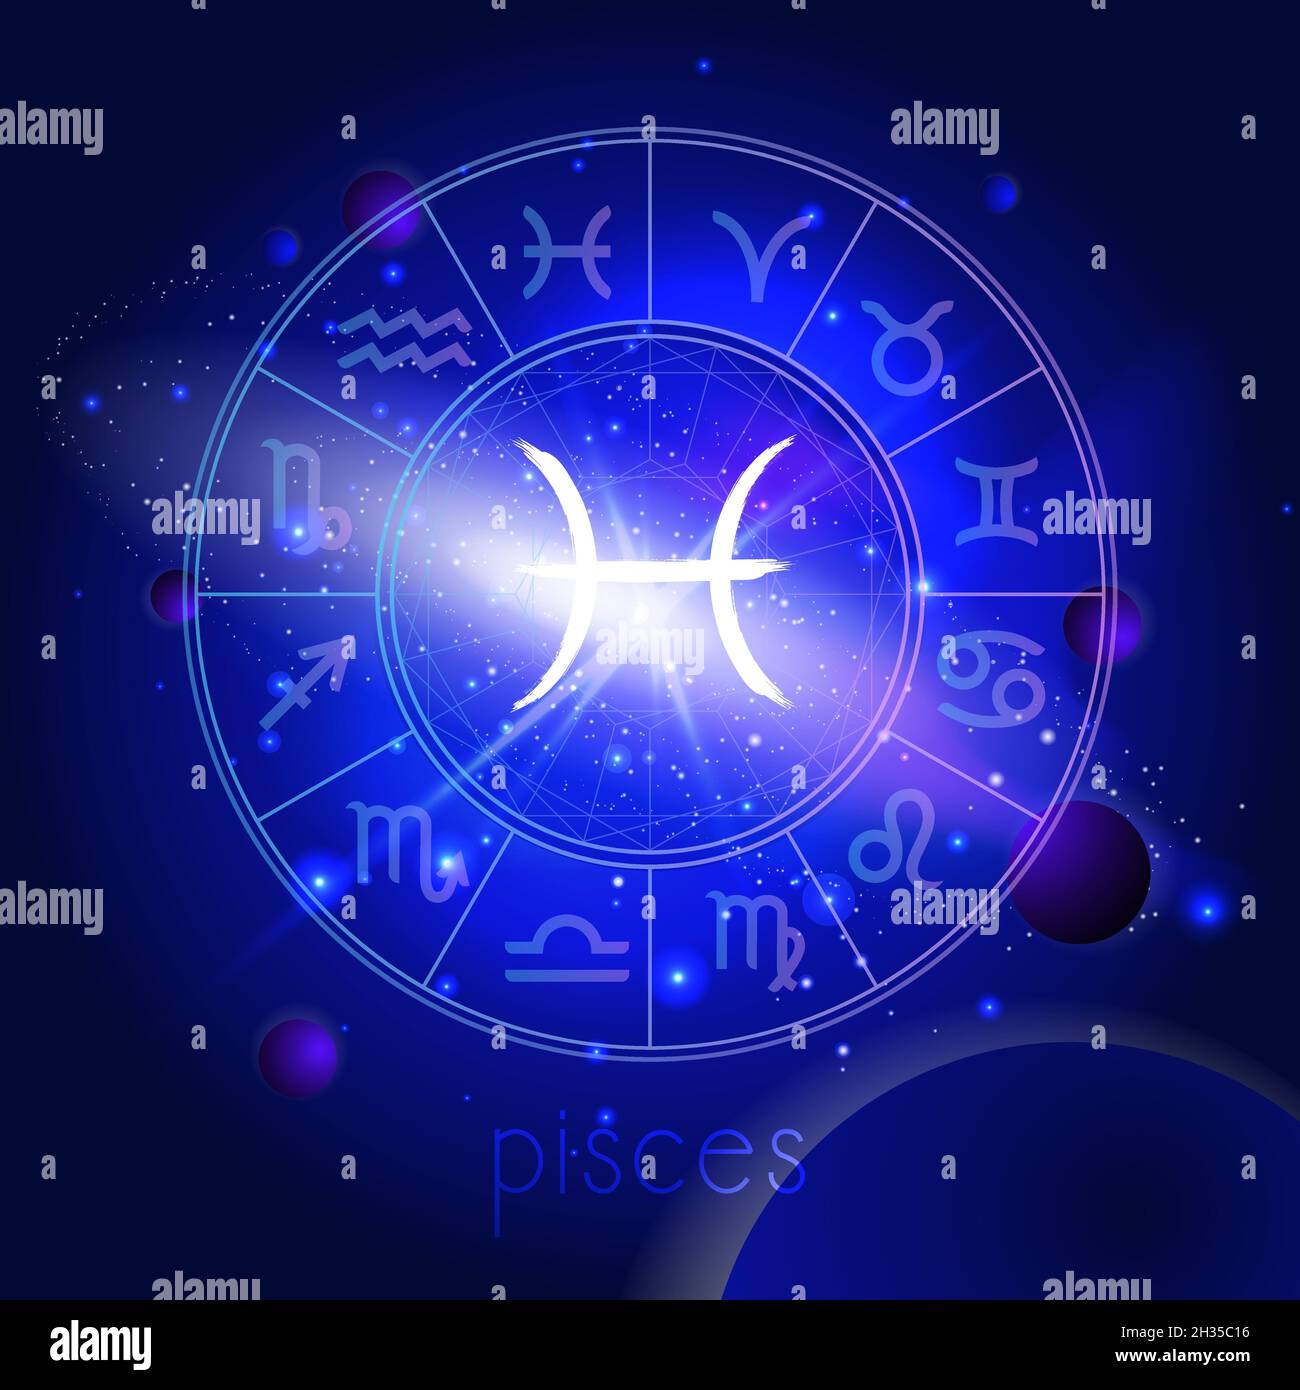 Vector illustration of sign PISCES with Horoscope circle against the space background with planets and stars. Sacred symbols in blue colors. Stock Vector